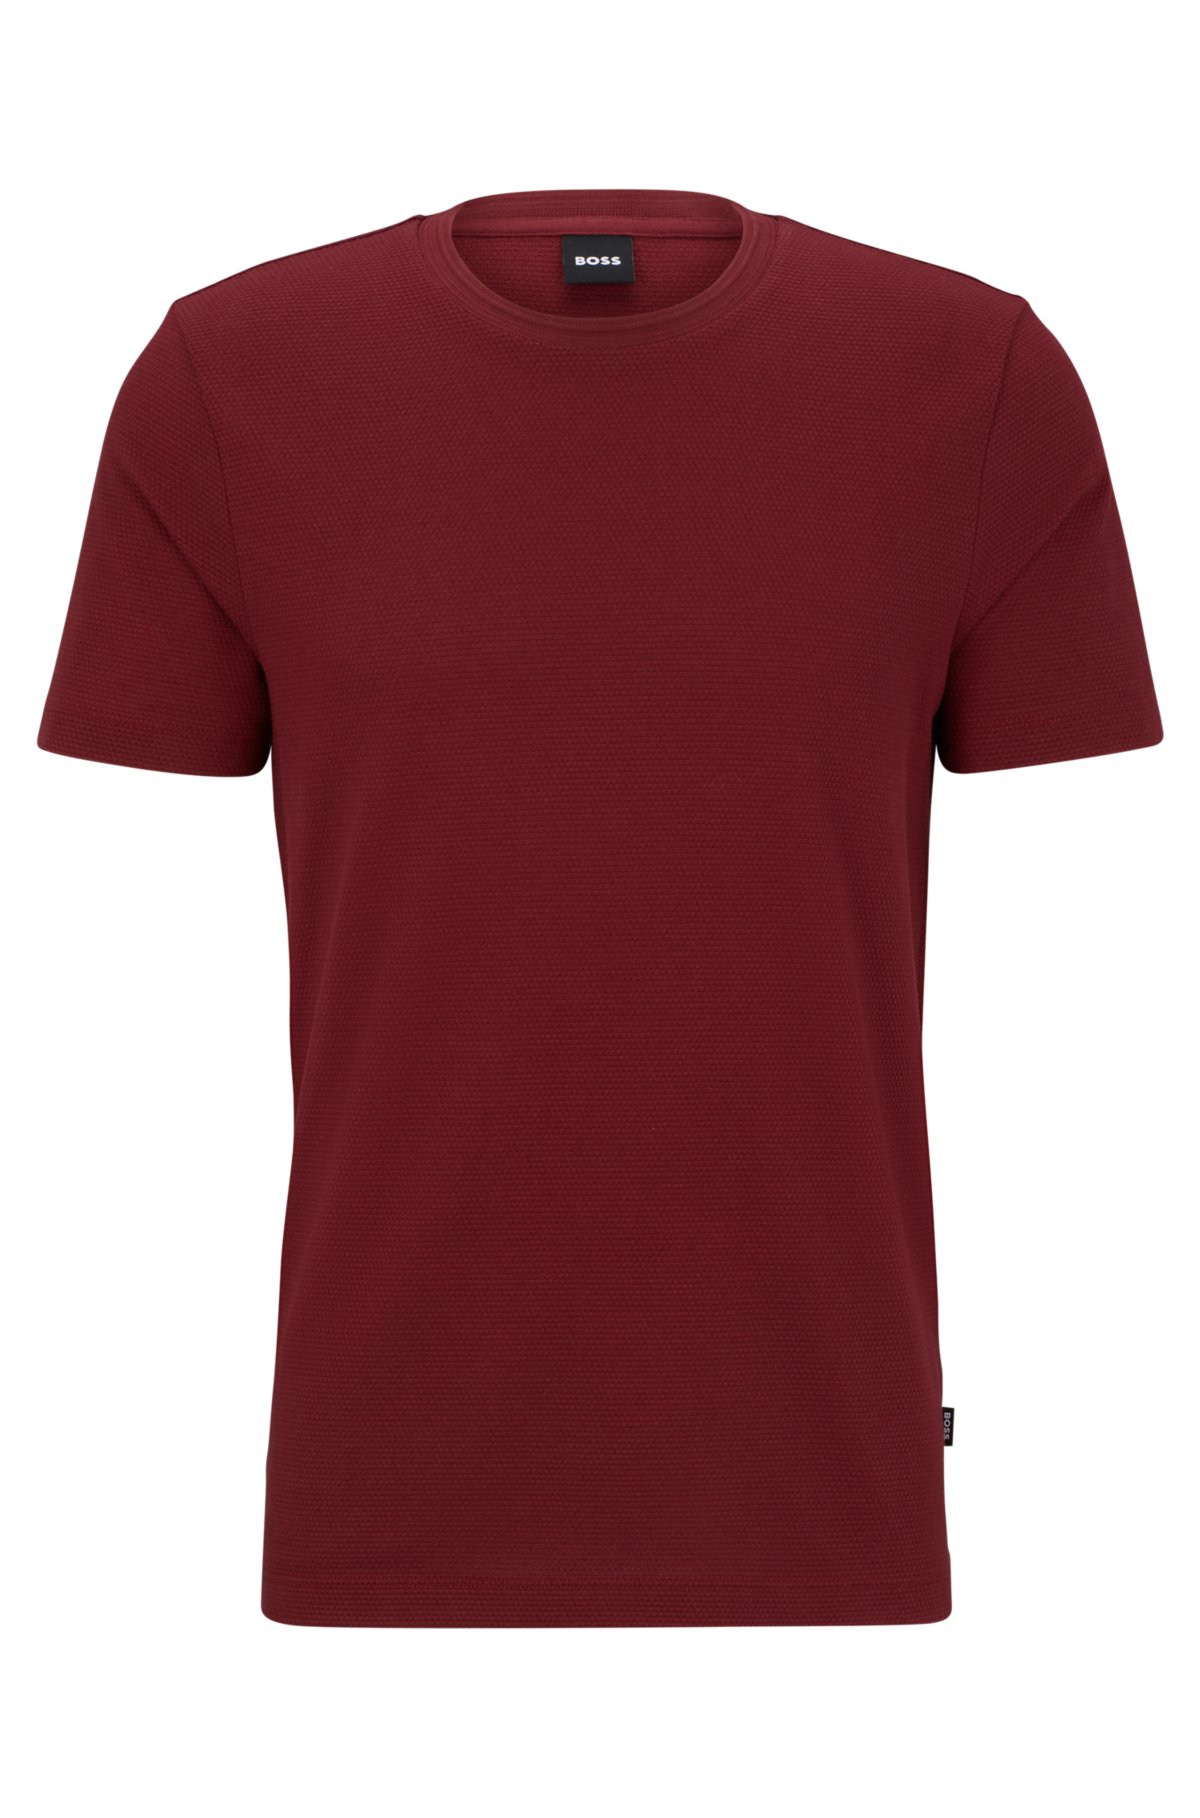 Cotton-blend T-shirt with bubble-jacquard structure, Dark Red